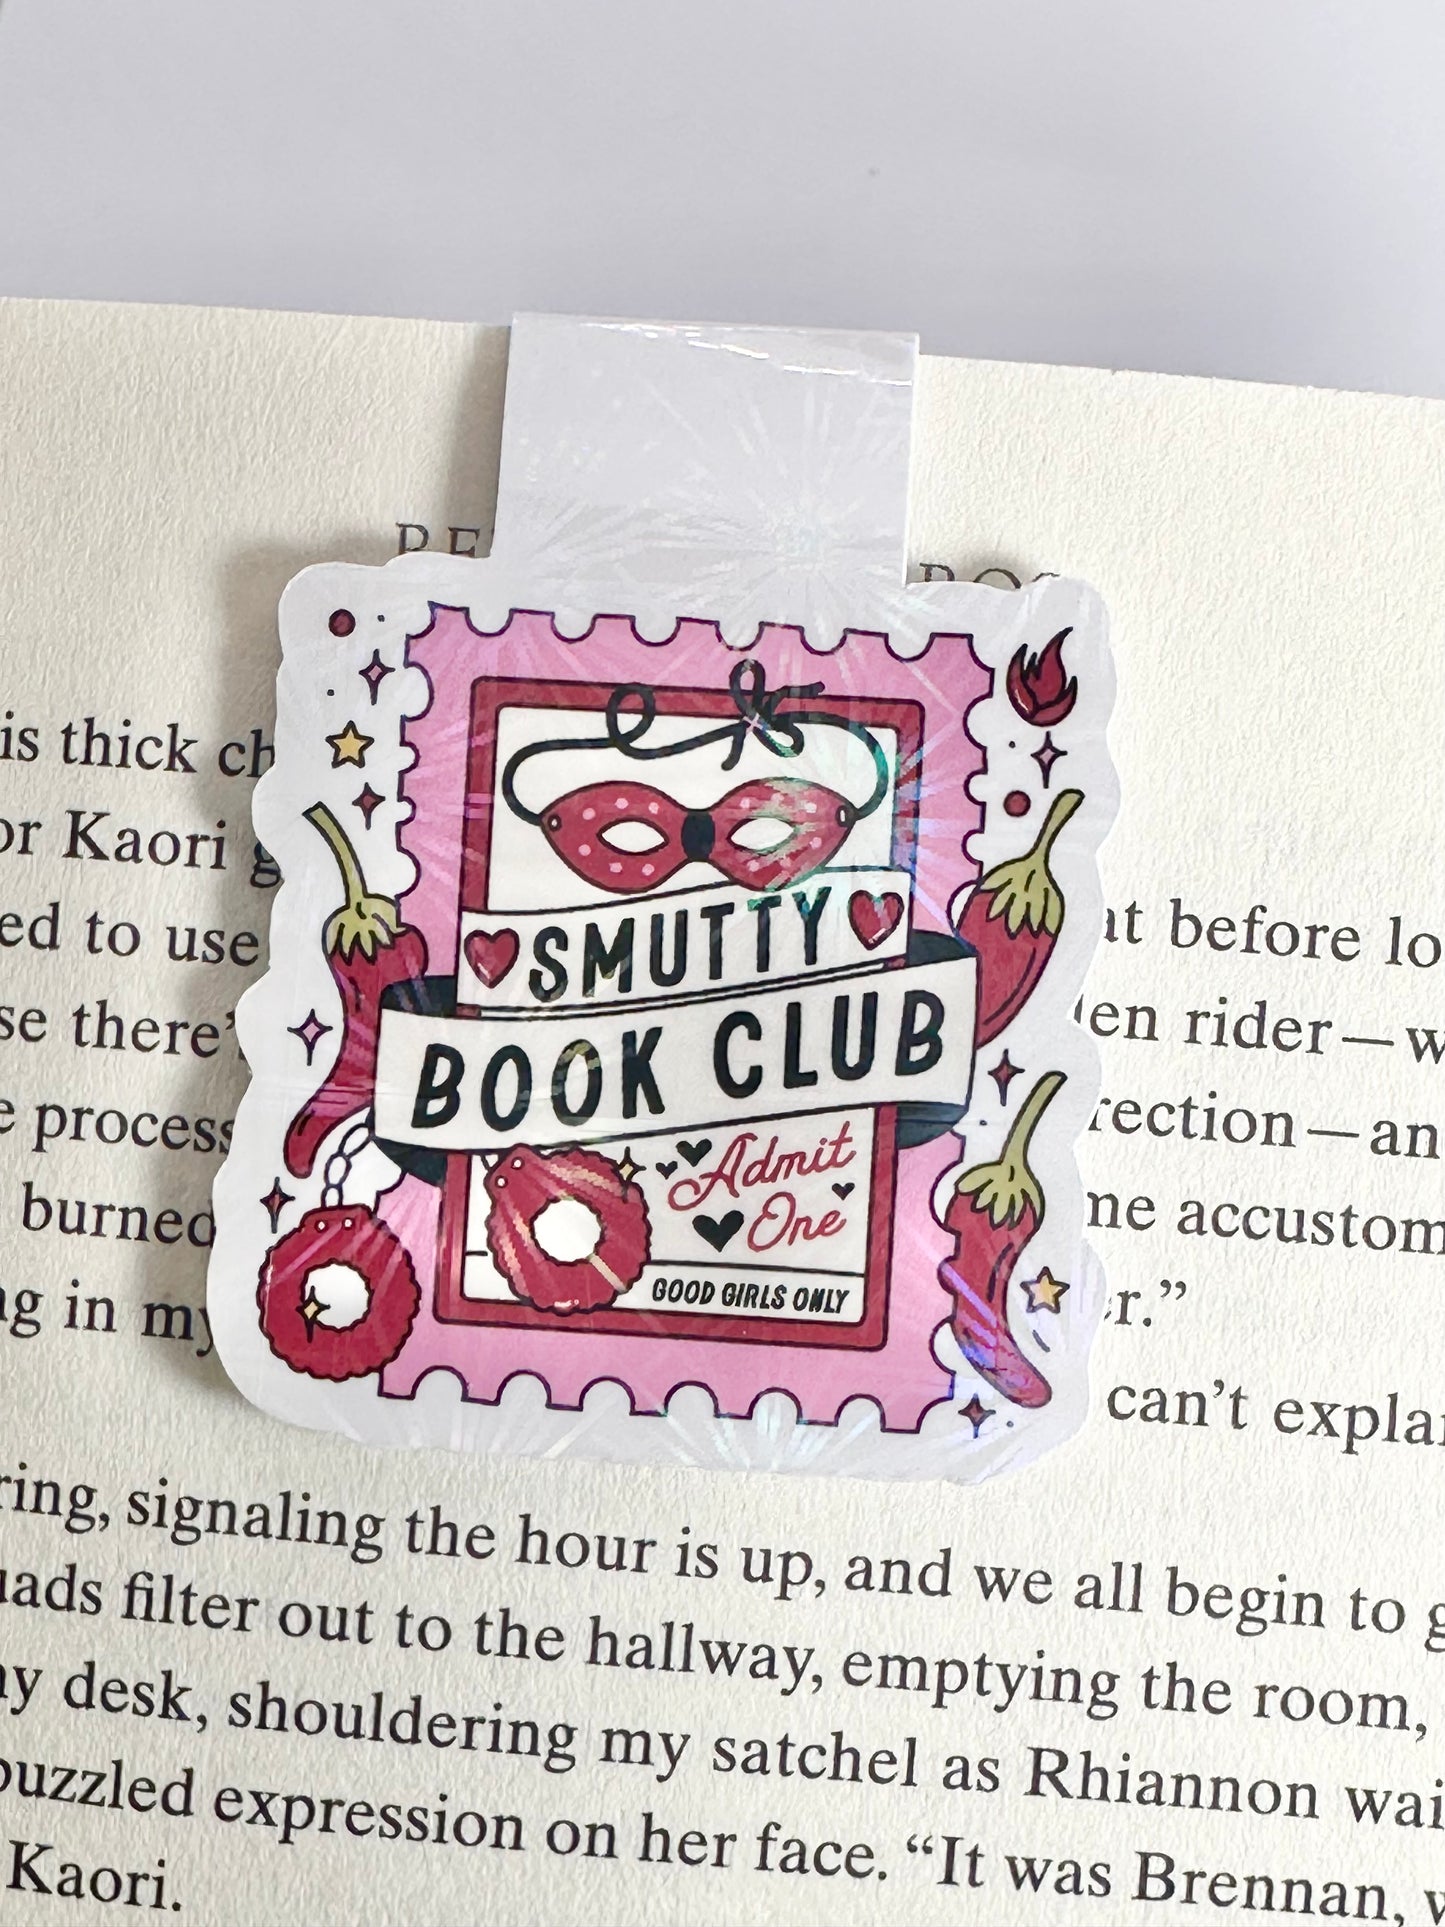 Smutty Book Club Magnetic Bookmark